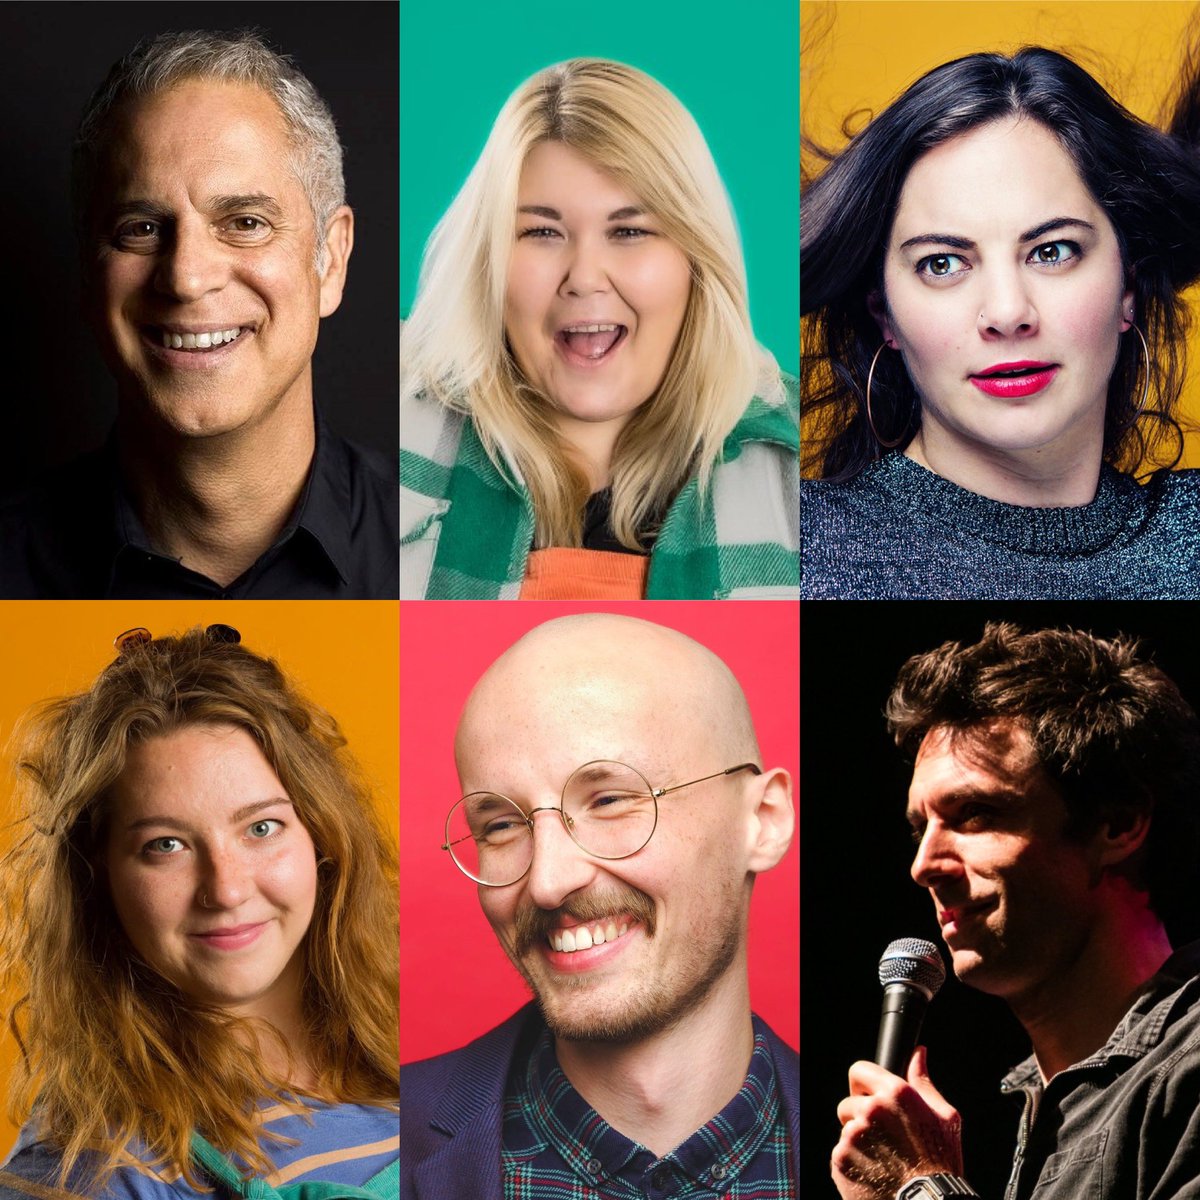 ✨COMEDY HUMP THIS WEEK✨ 🐪 Wed 3 April 🐪 🎟️ FREE TICKETS 🙀🎟️ 🌟@hannahbycz 🌟@jessienixoncmdy 🌟@irresponsabelle 🌟@andyfieldhello 🌟Mike Capozzola 🌟@ClintJEdwards Doors 7pm | Show 8pm @Backyard_Comedy Reserve your FREE seats here 🎟️ 👉 bit.ly/ComedyHump